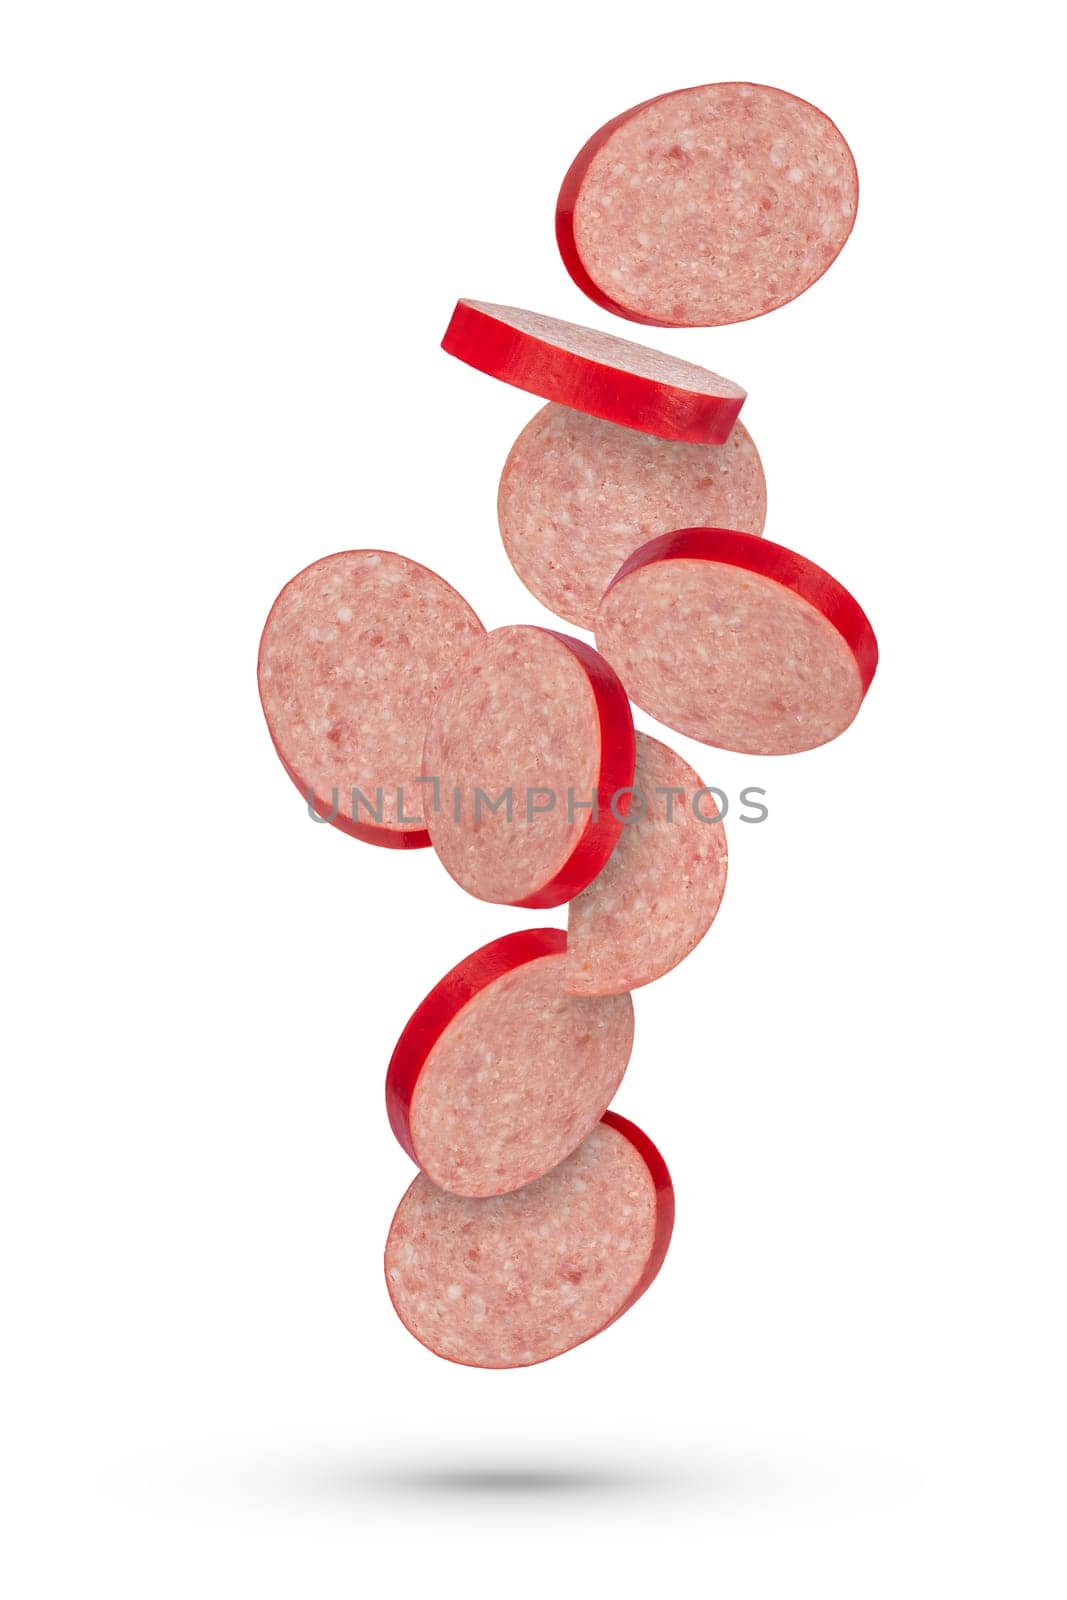 Flying sausage. Slices of salami sausage on a white isolated background. Slices of sausage scatter in different directions and fall casting a shadow. To be inserted into a design or project. by SERSOL